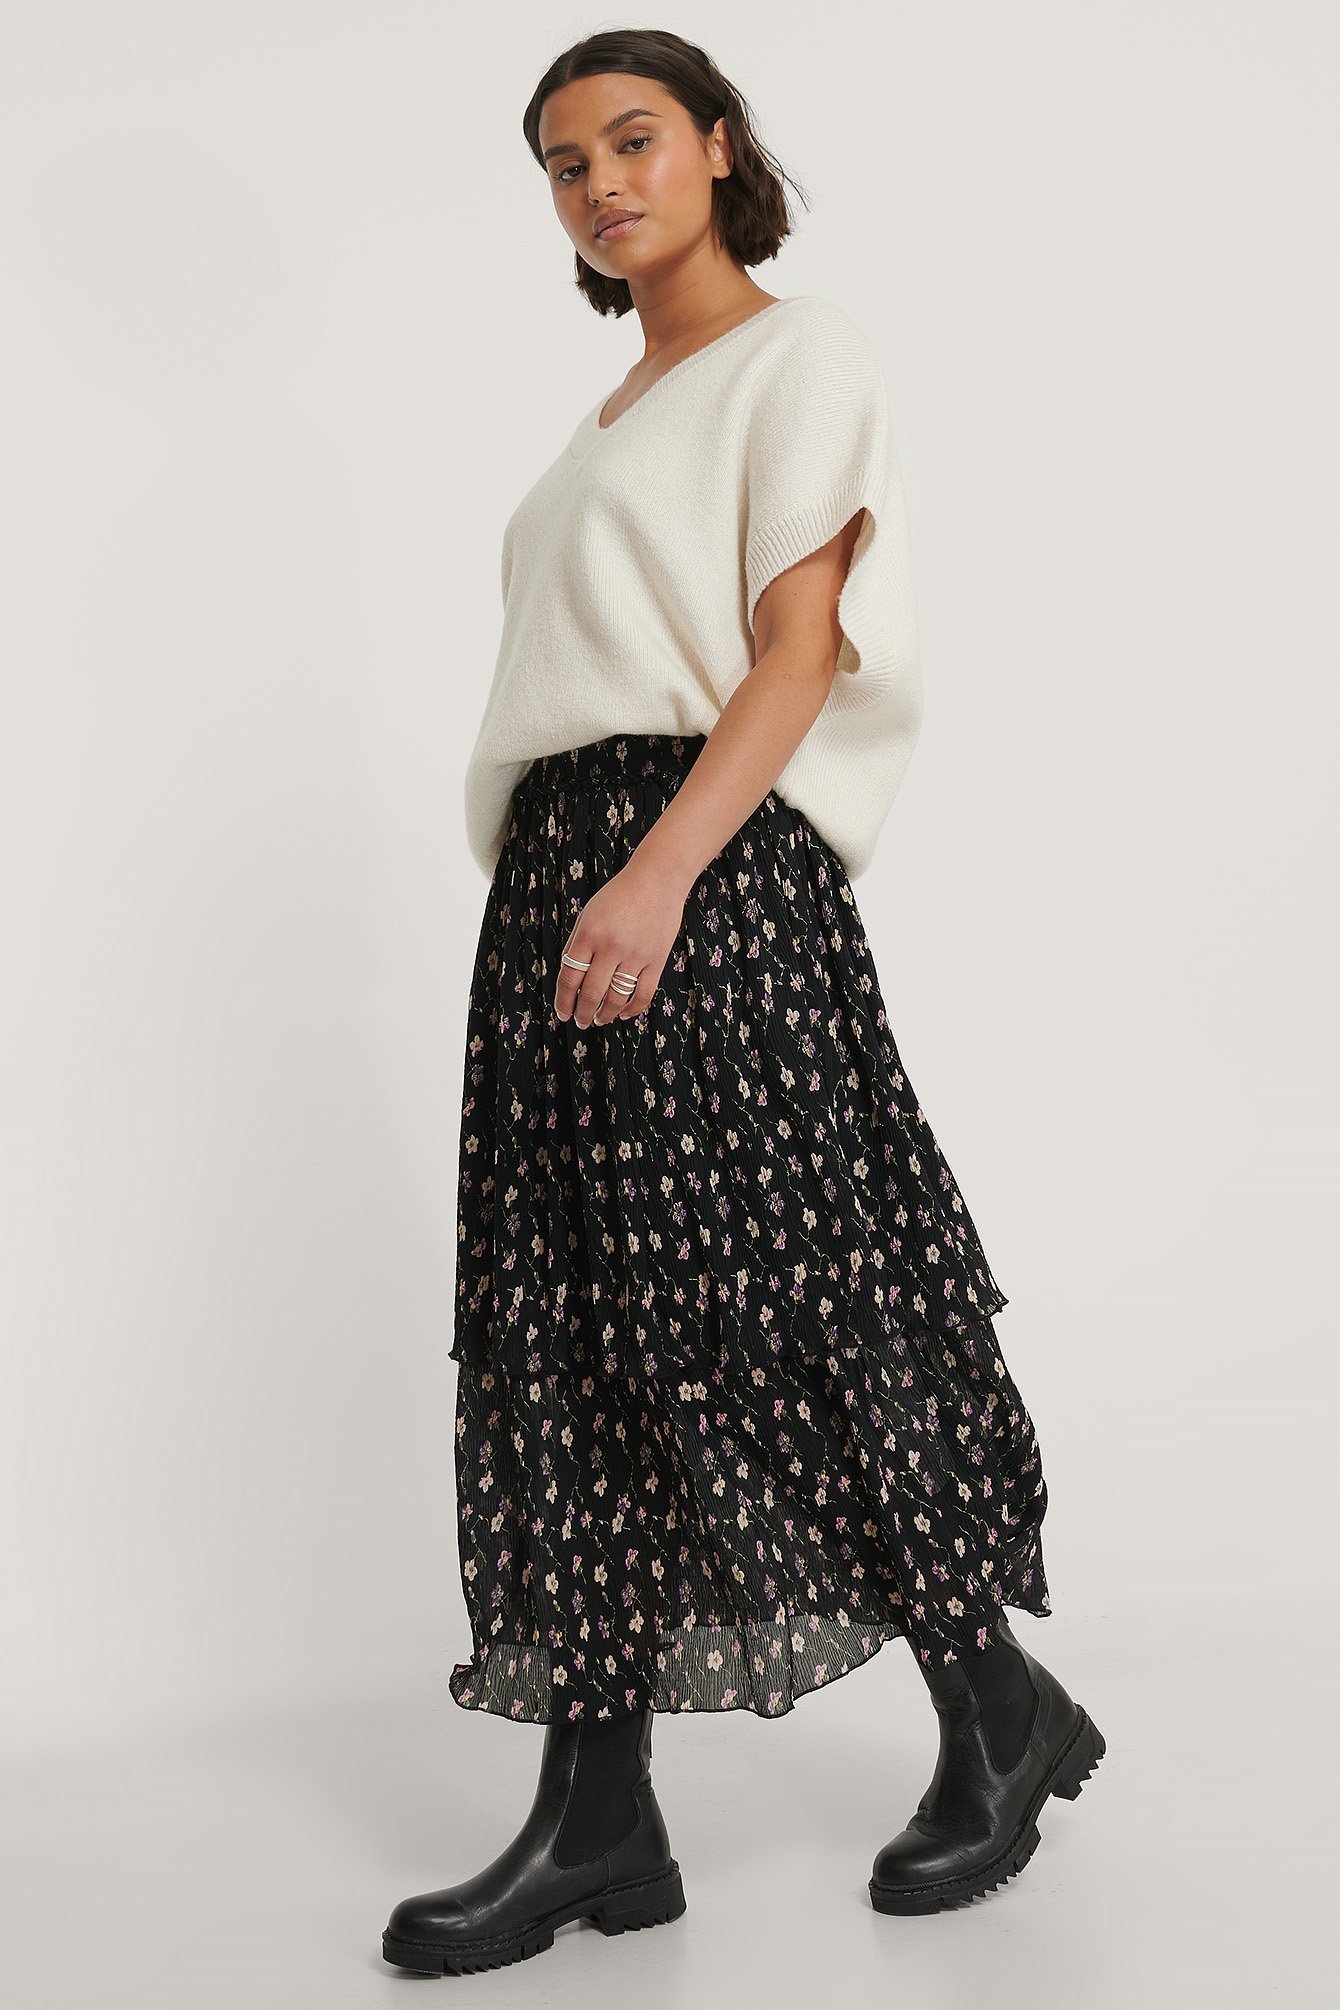 Structured Smocked Midi Skirt Outfit.